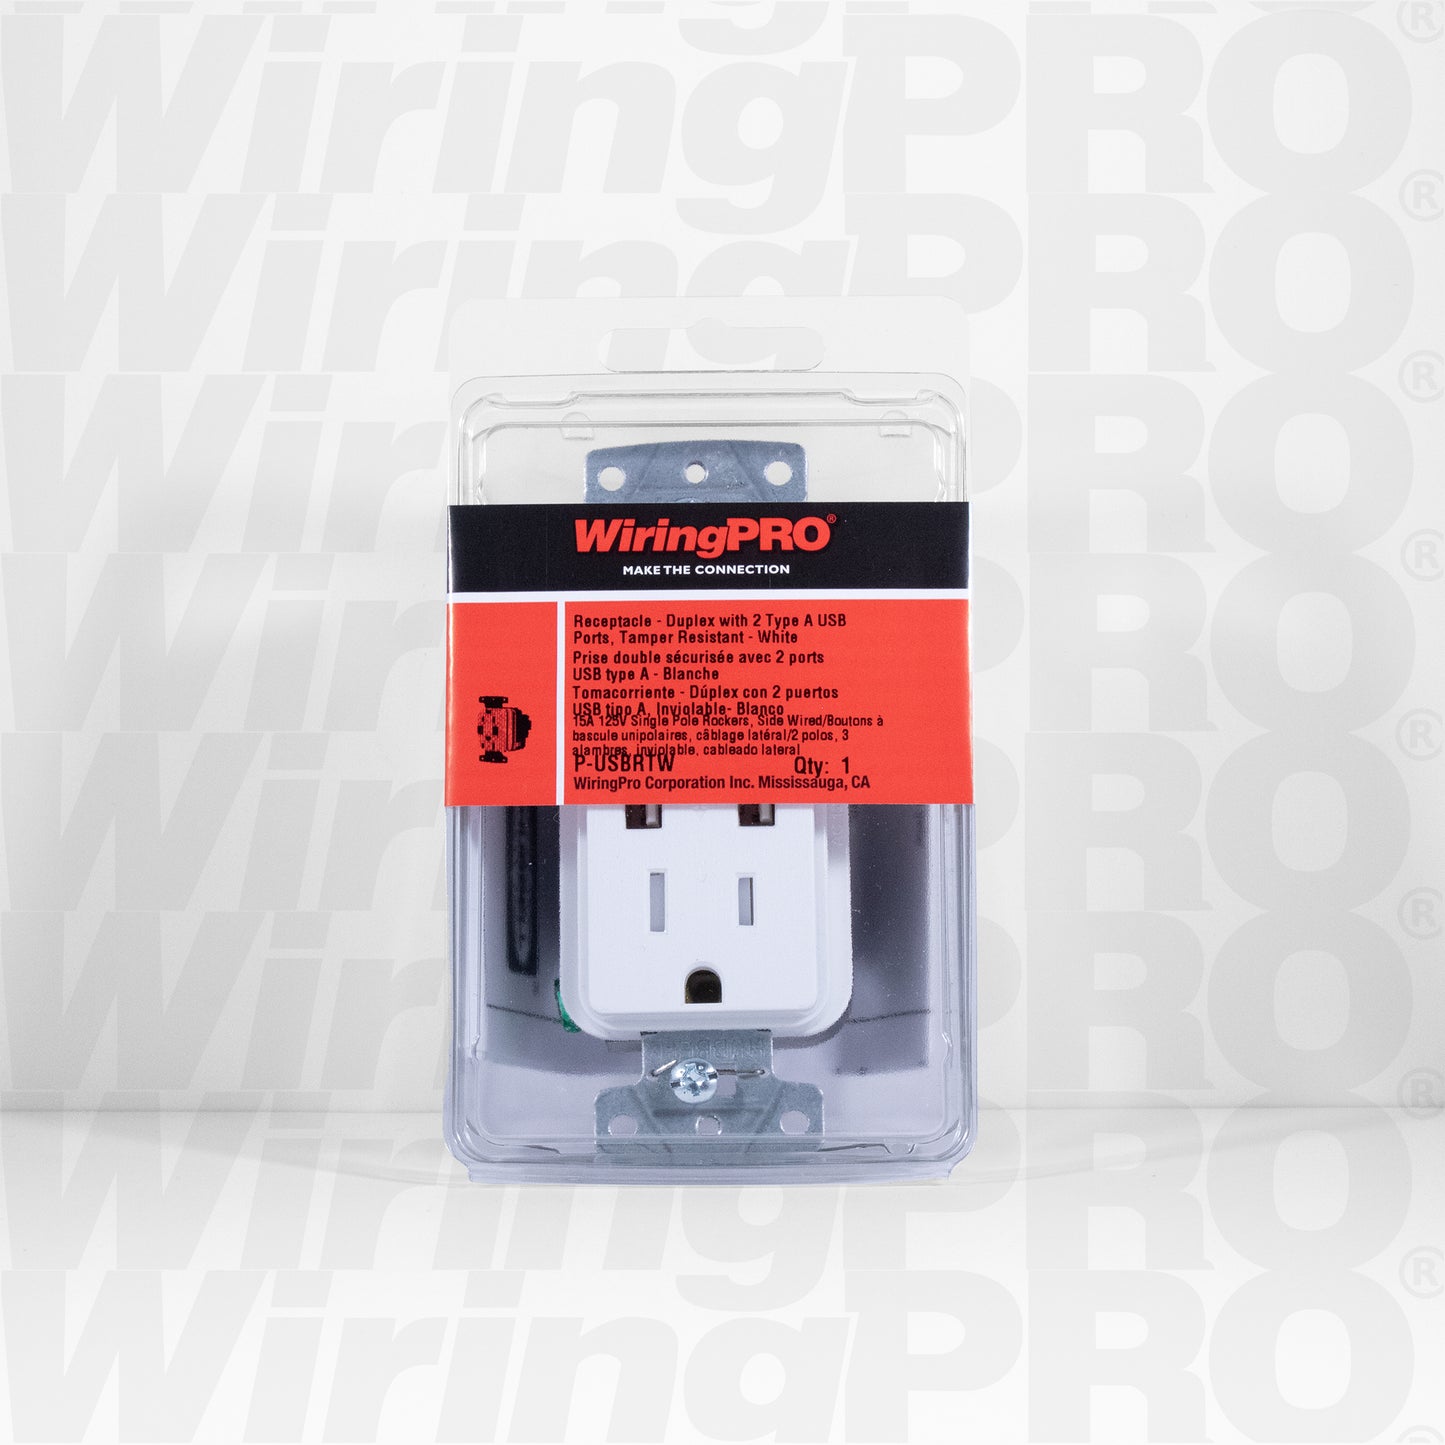 GFCI Self Testing Receptacle and Tamper Resistant Outlet